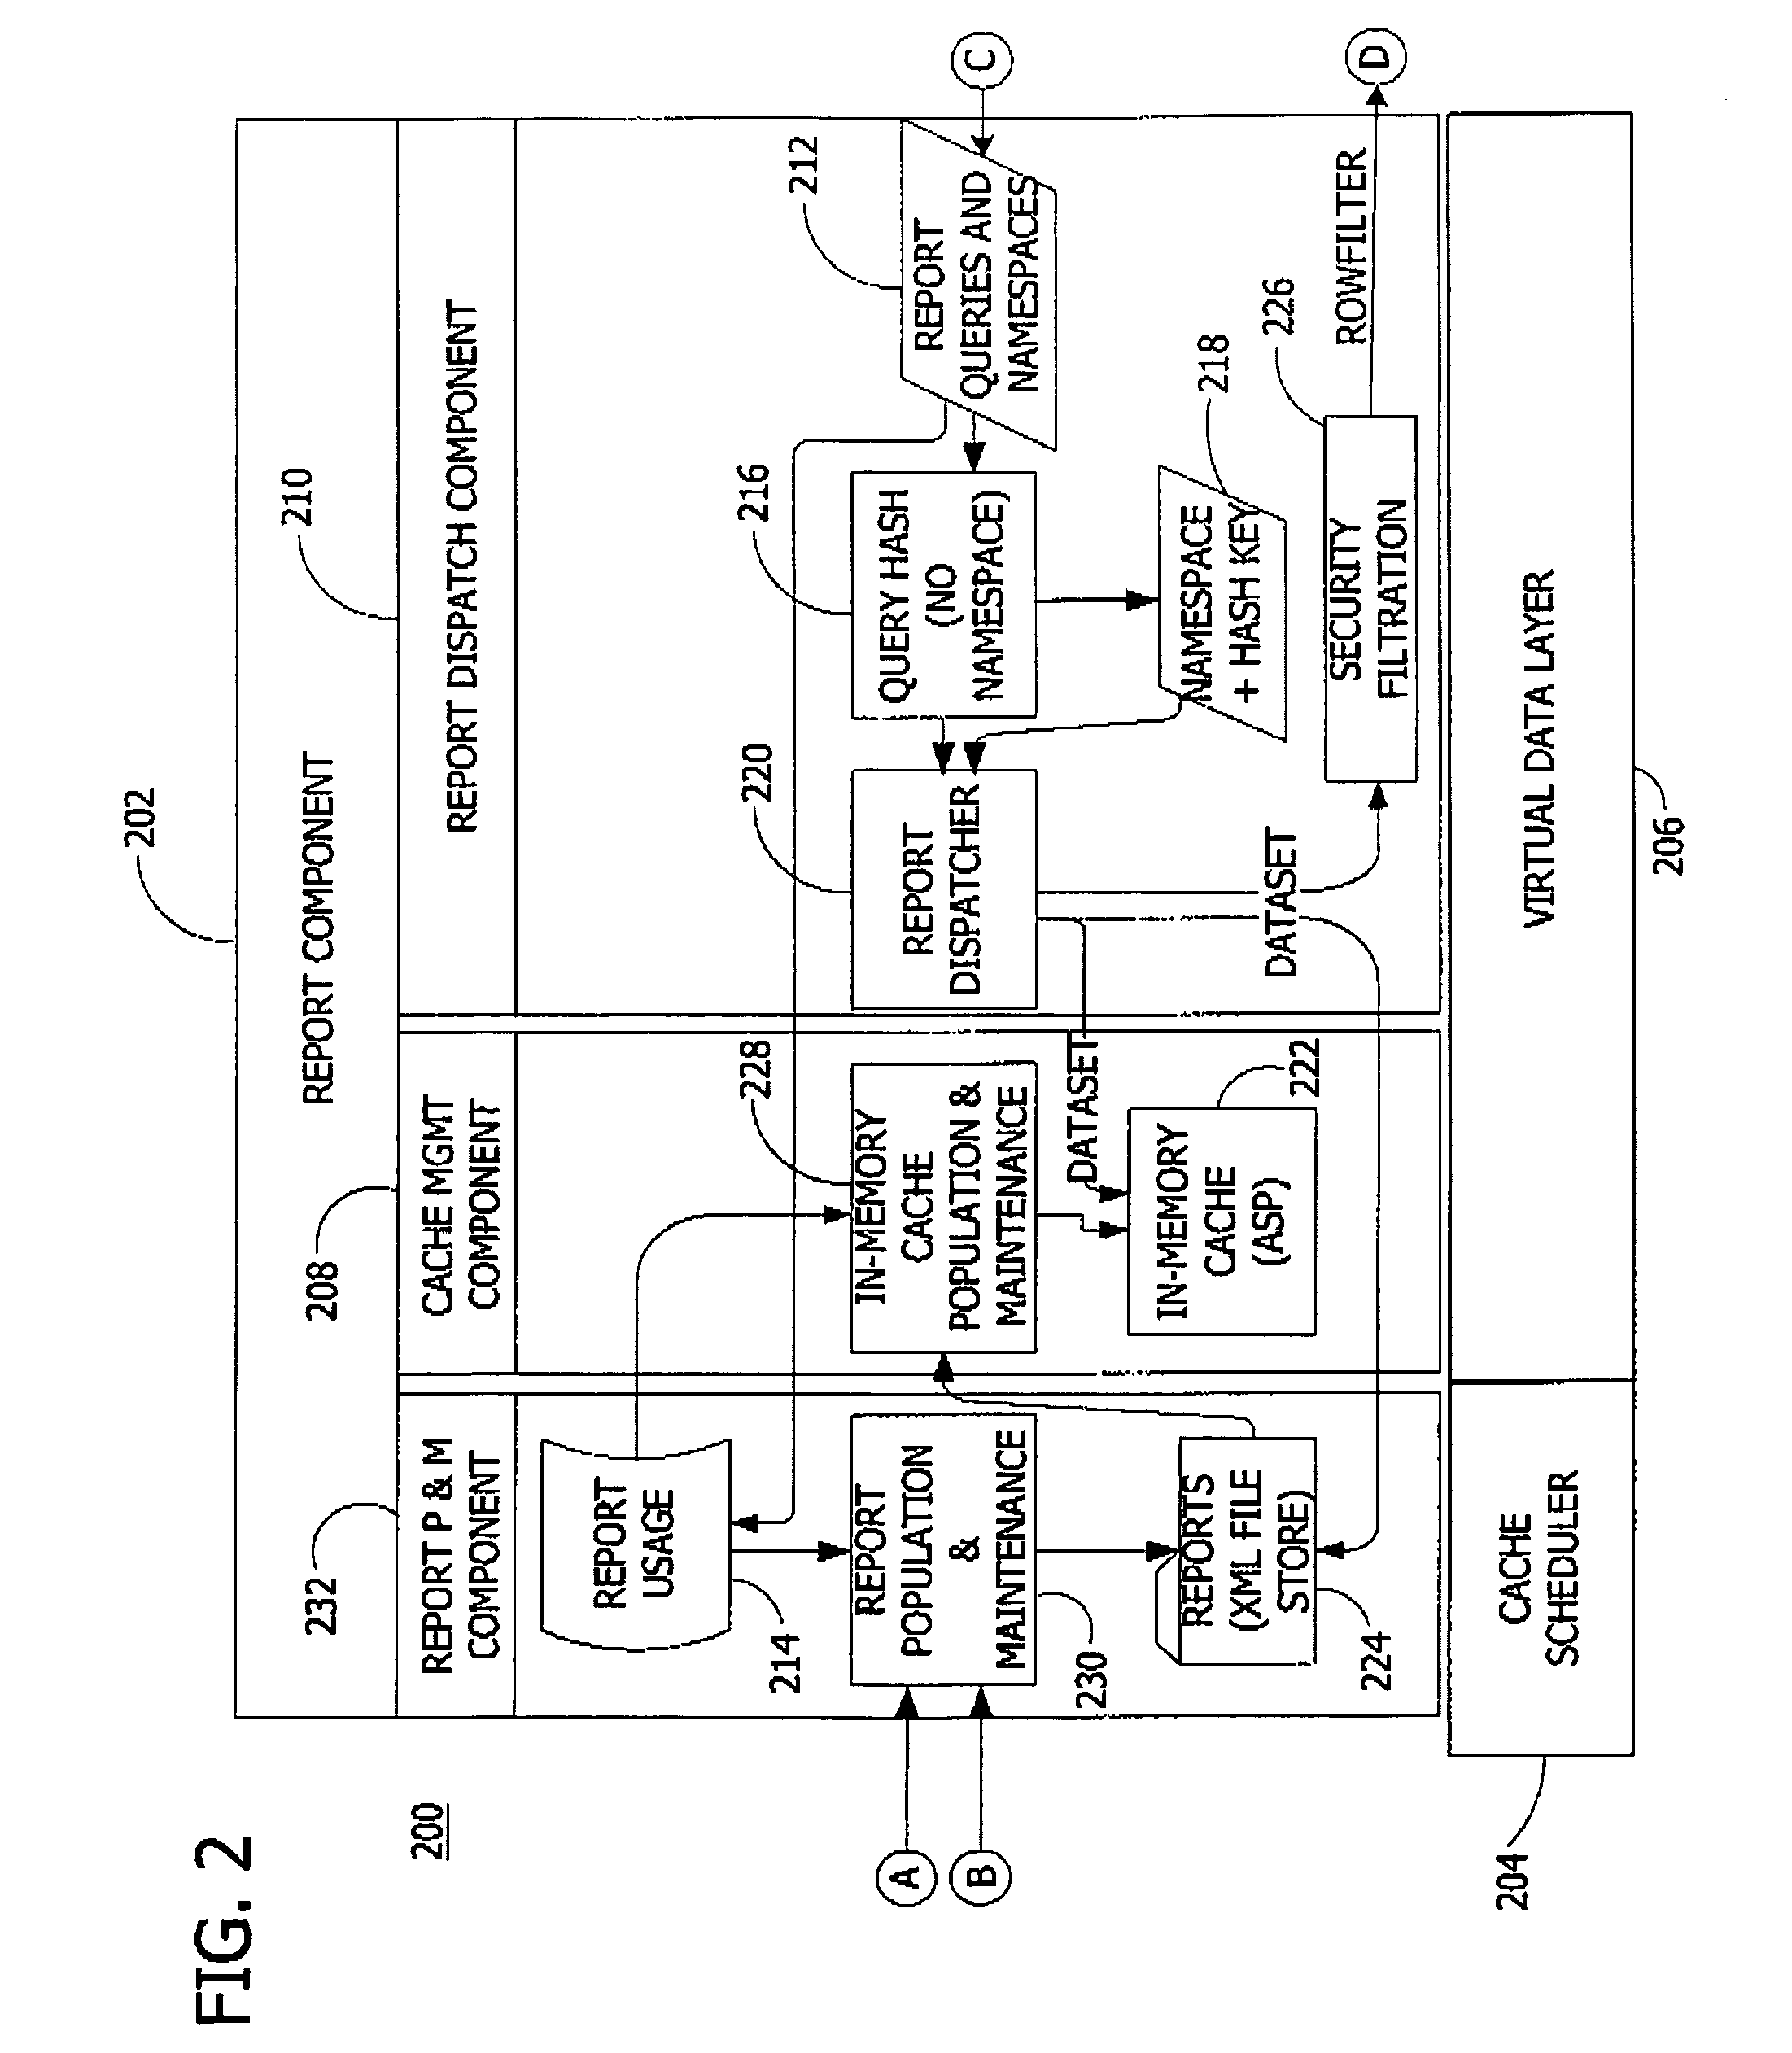 Method and system for a reporting information services architecture